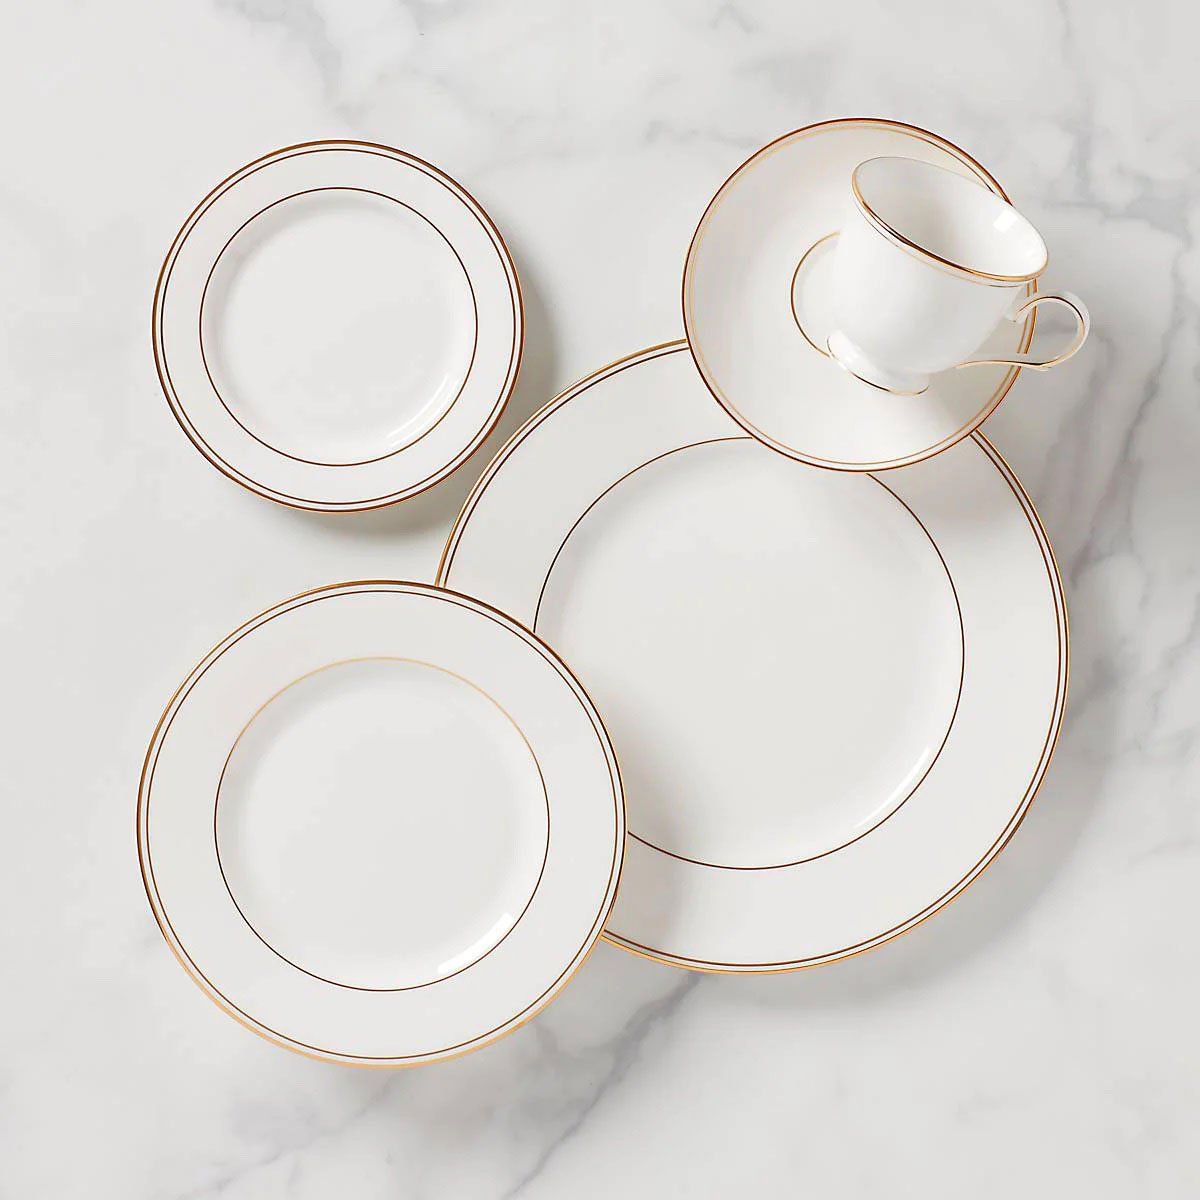 Lenox Federal Gold 5 Piece Place Setting